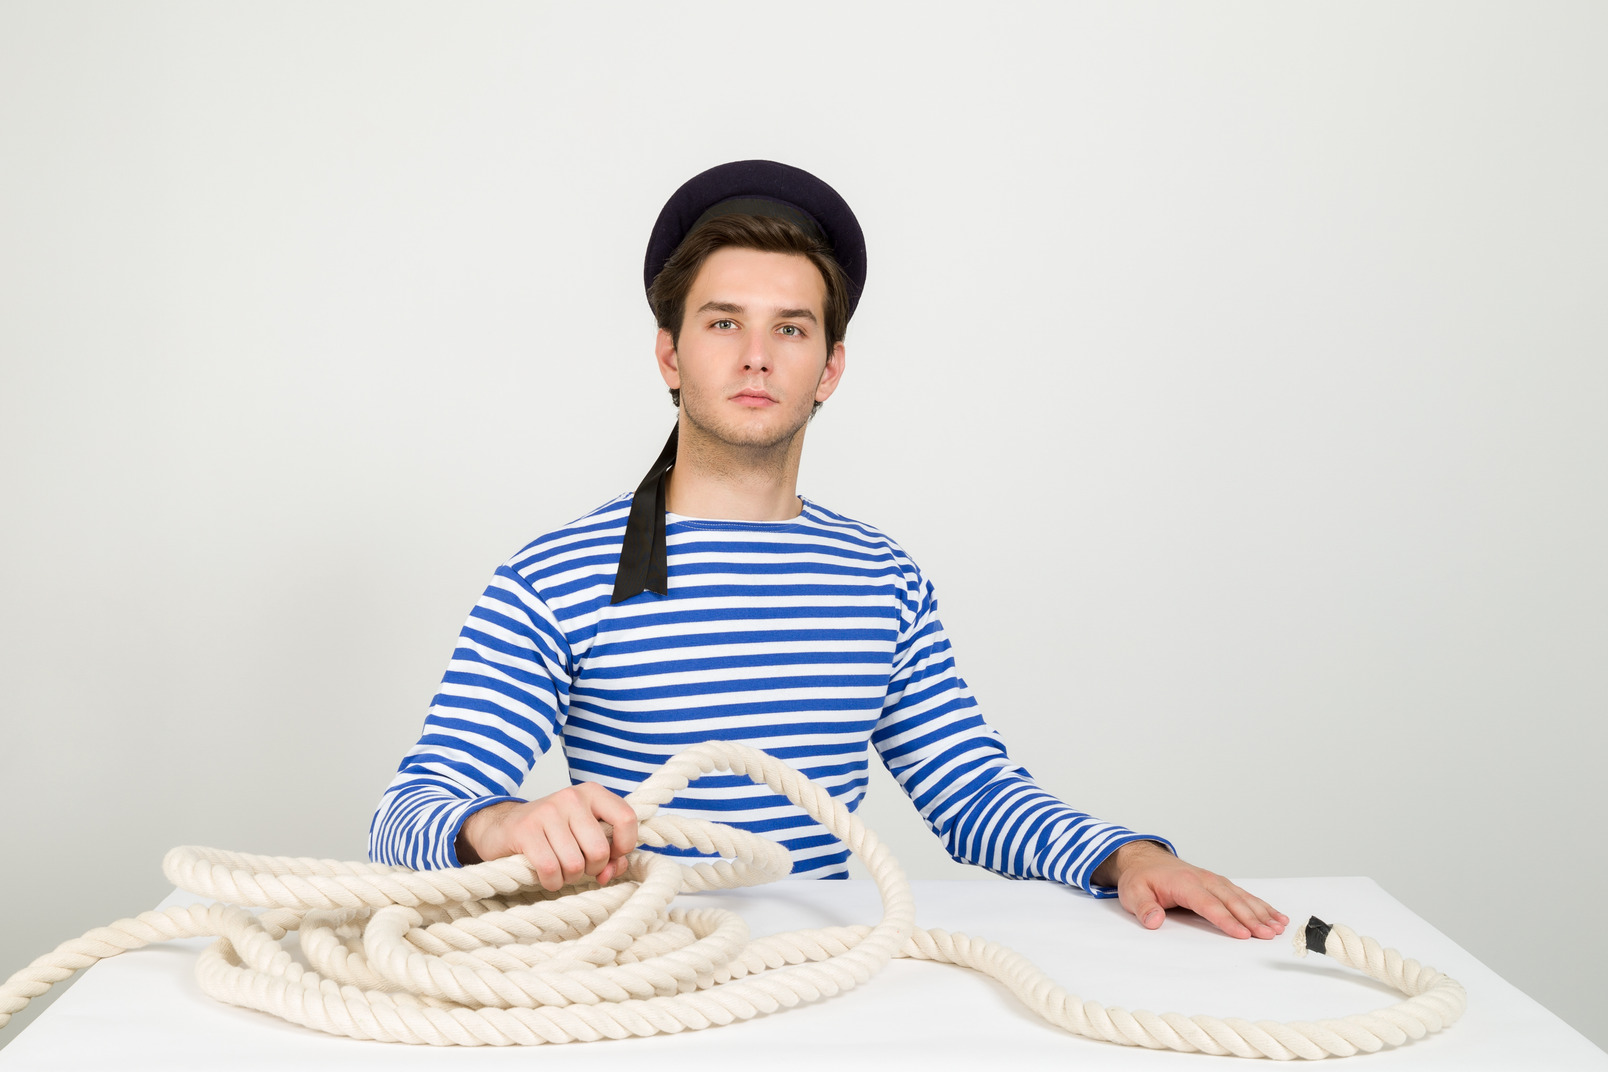 Proud sailor sitting at the table and holding rope